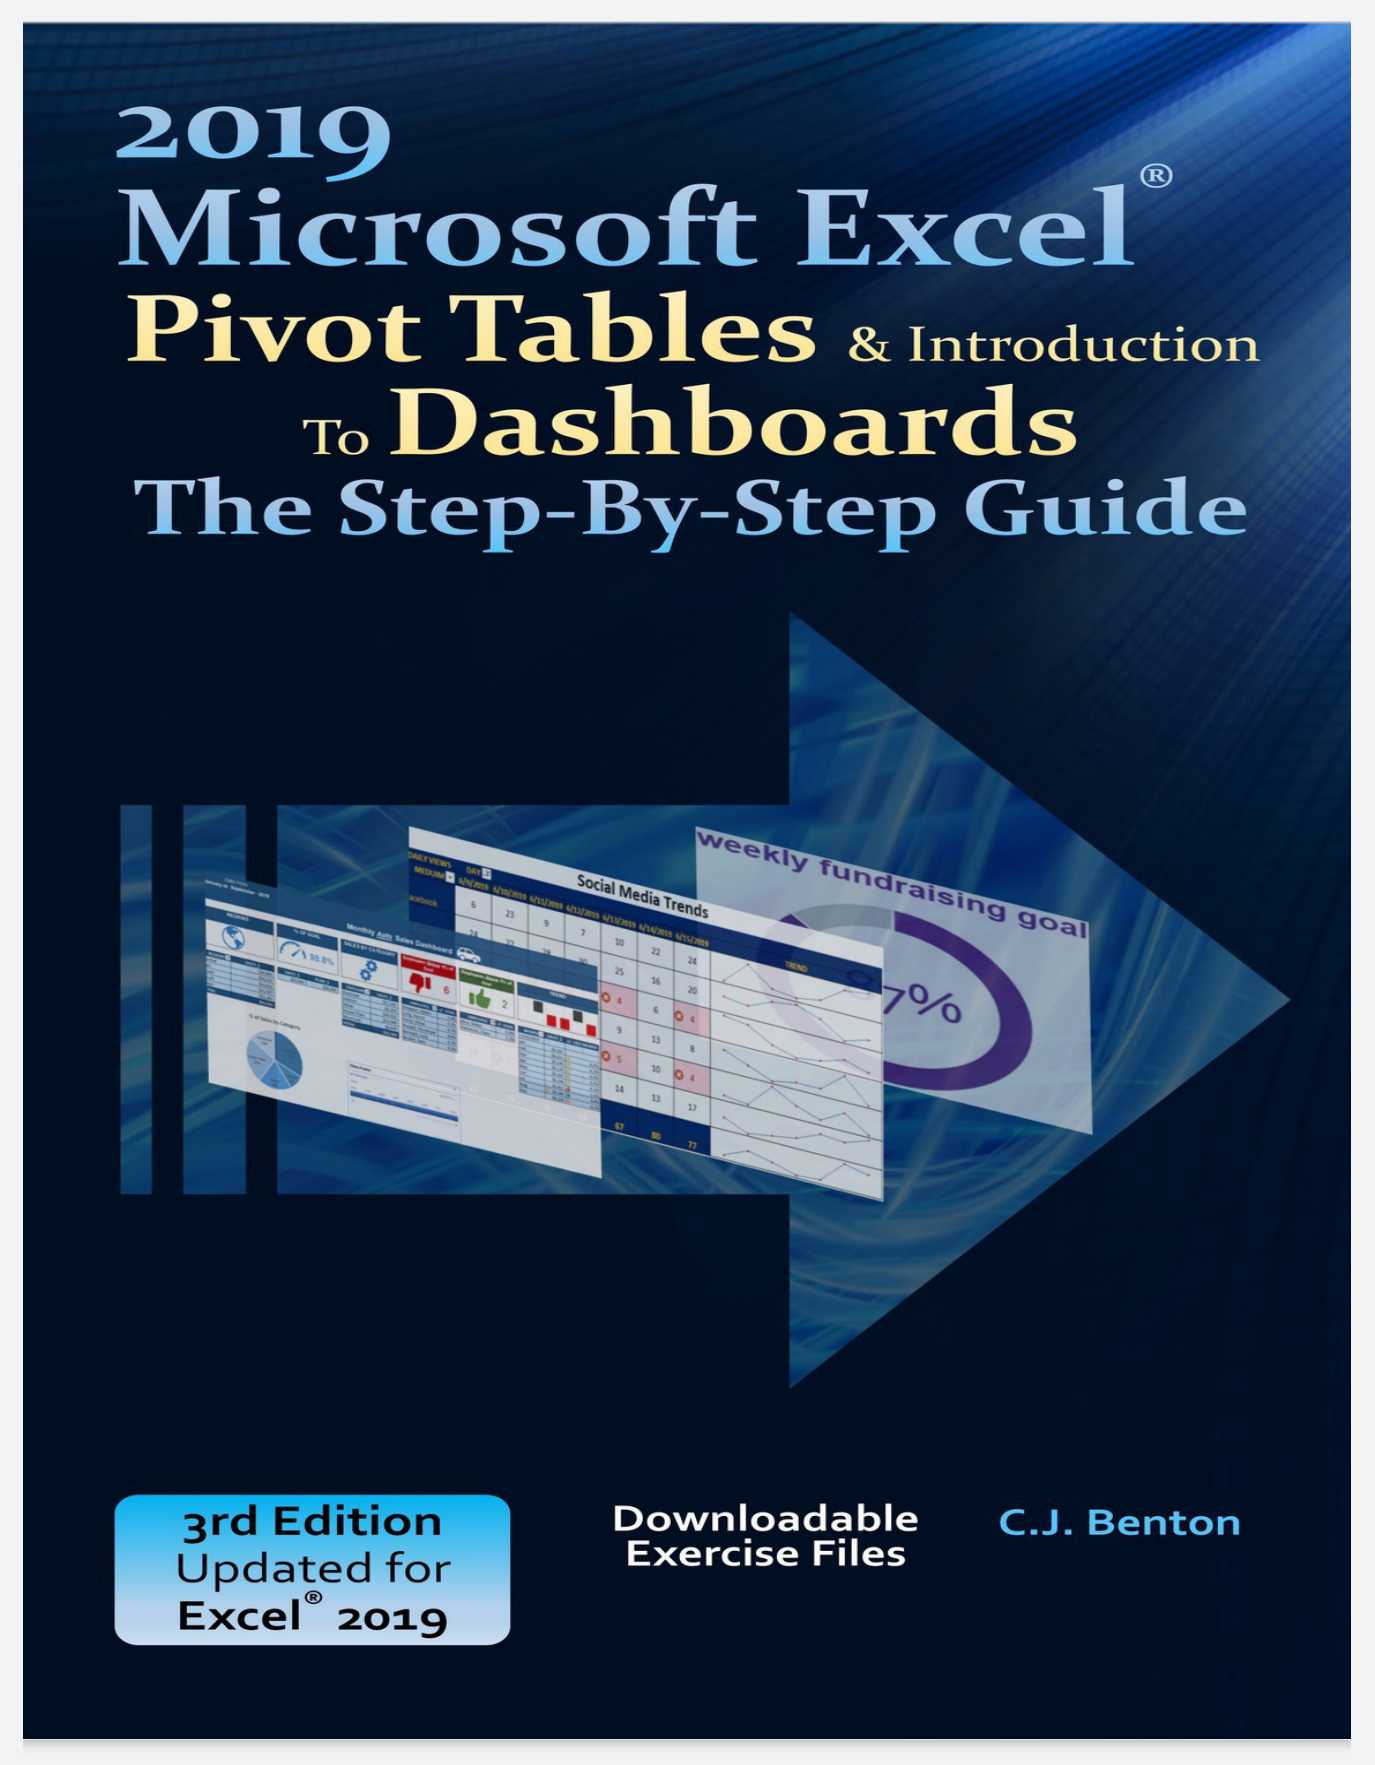 Excel 2019 Pivot Tables & Introduction To Dashboards The Step-By-Step Guide Free PDF